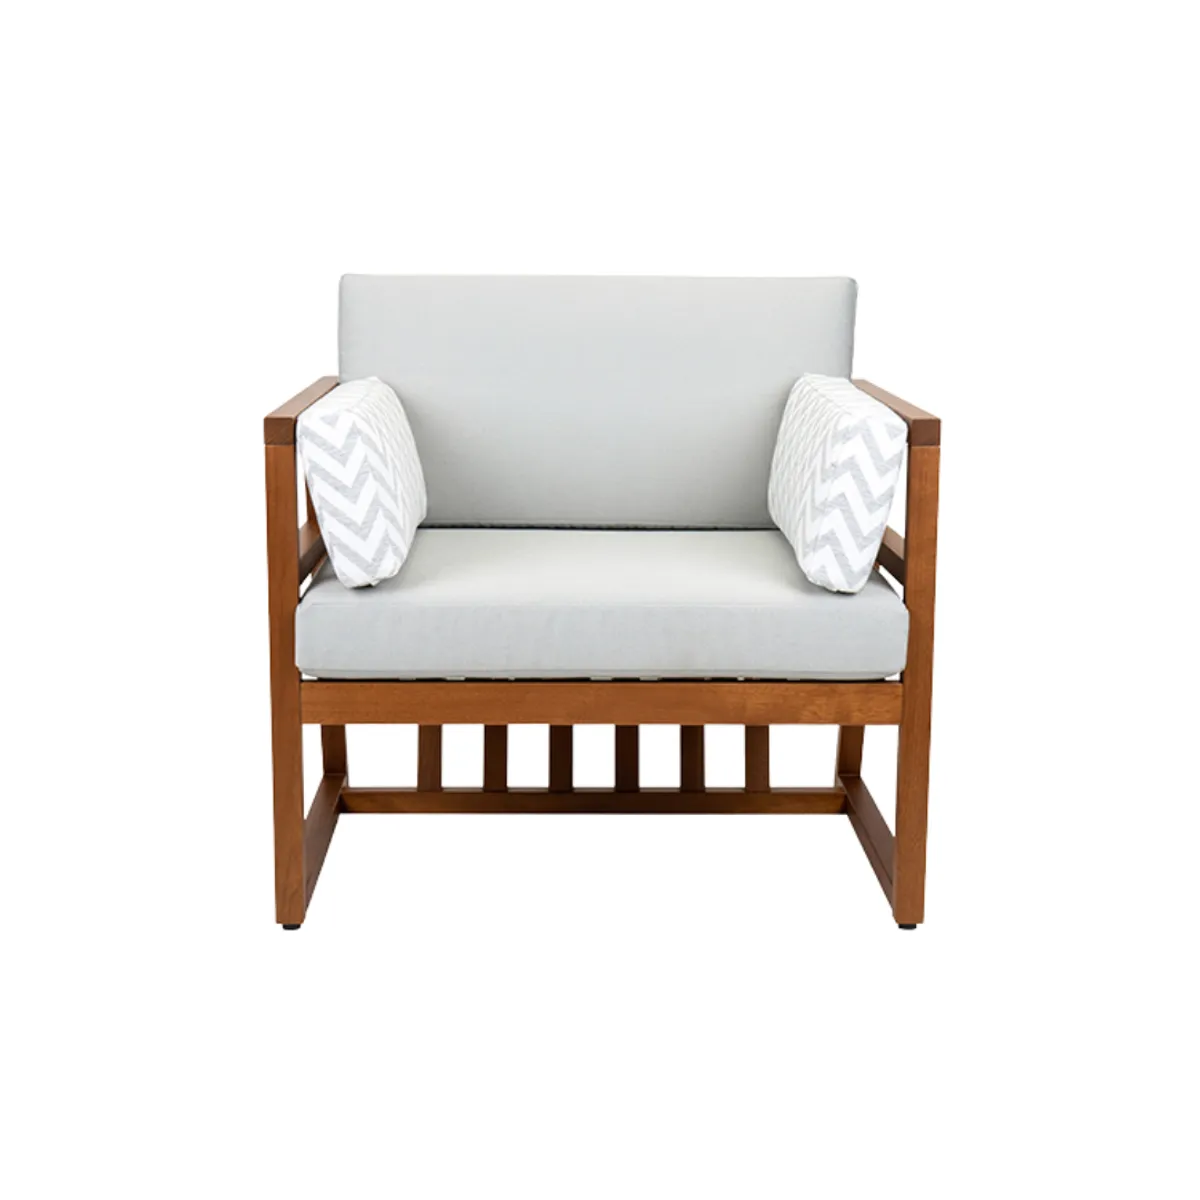 Persia lounge chair 2